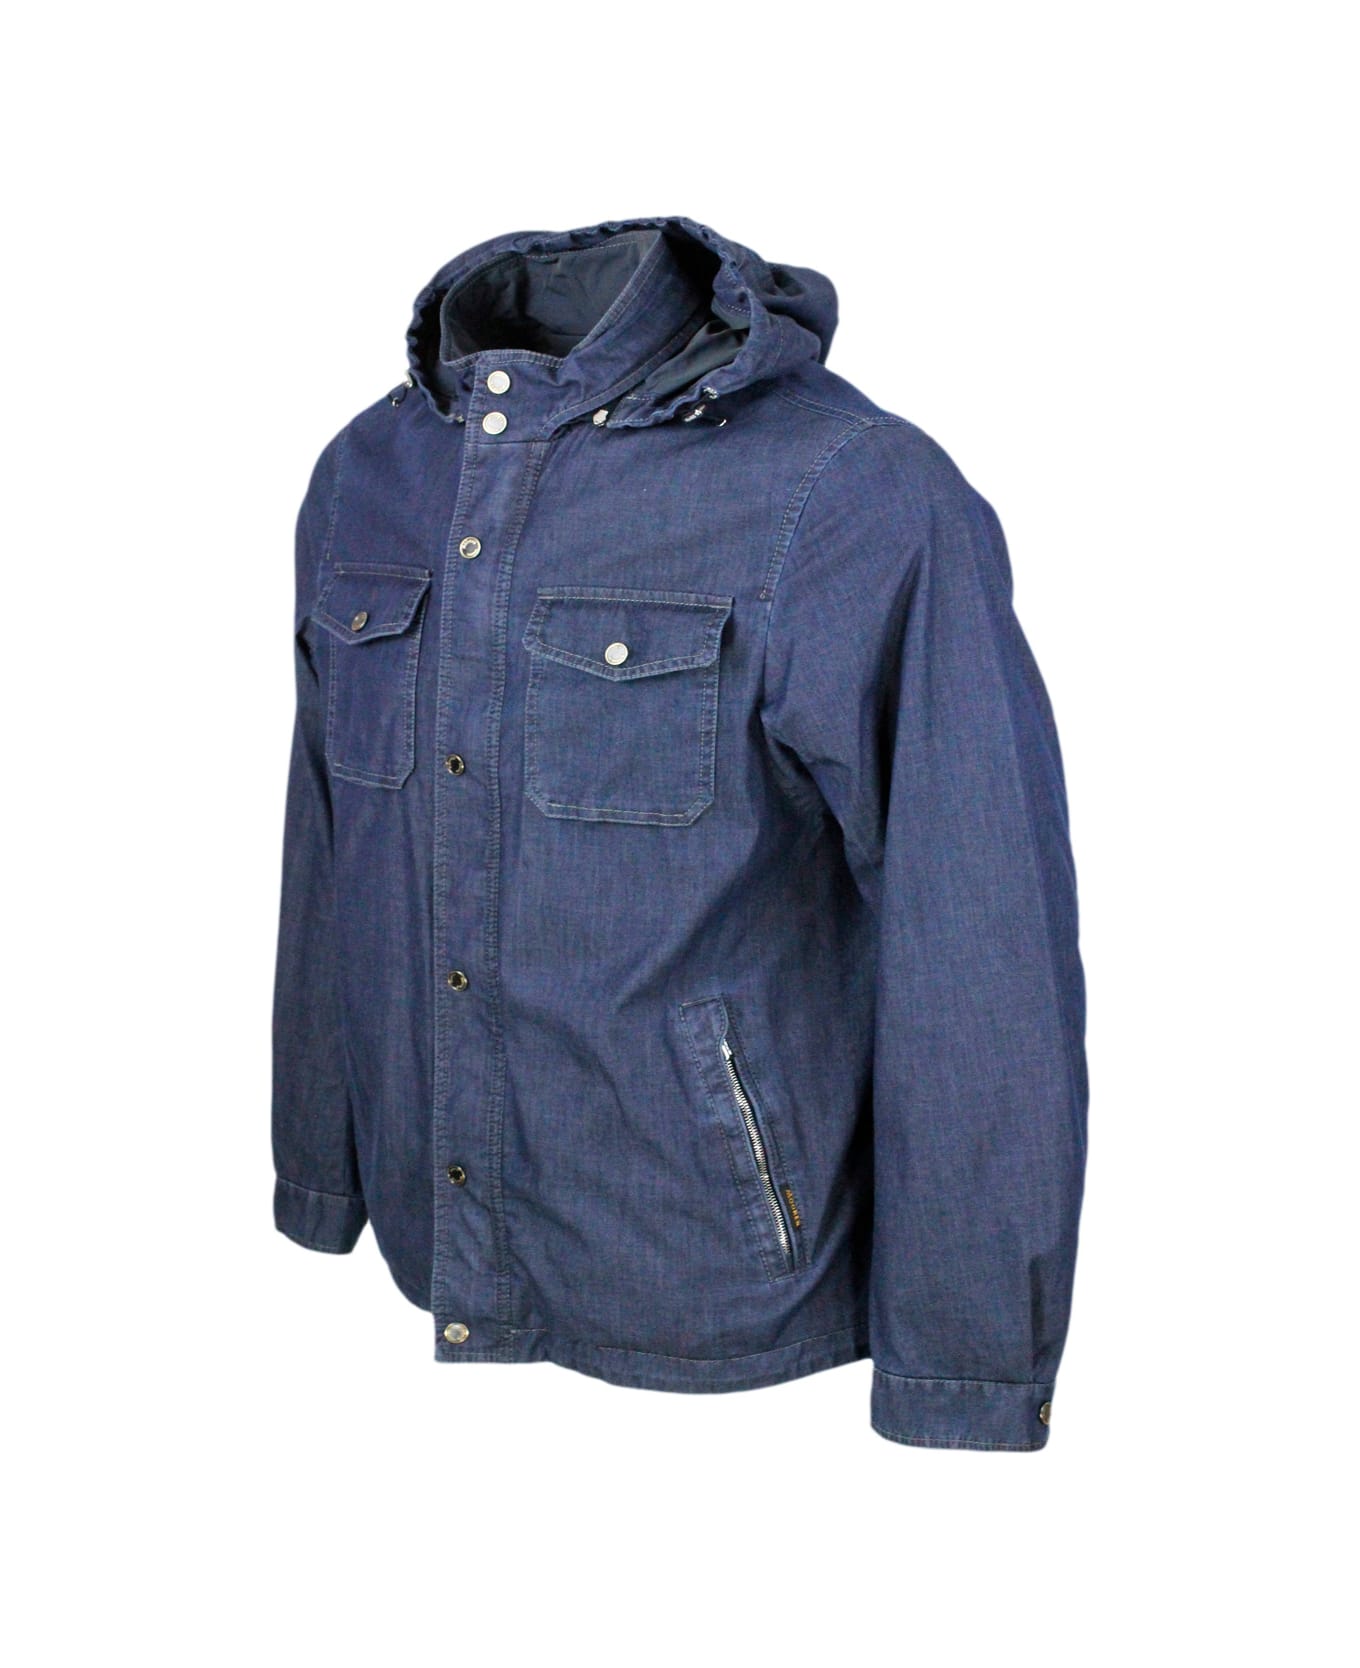 Moorer Anorak Shirt Jacket From The Water Proof Line With 2 Umbrellas With Detachable Hood In Light And Soft Denim-effect Smooth Menbrazed Fabric - Denim